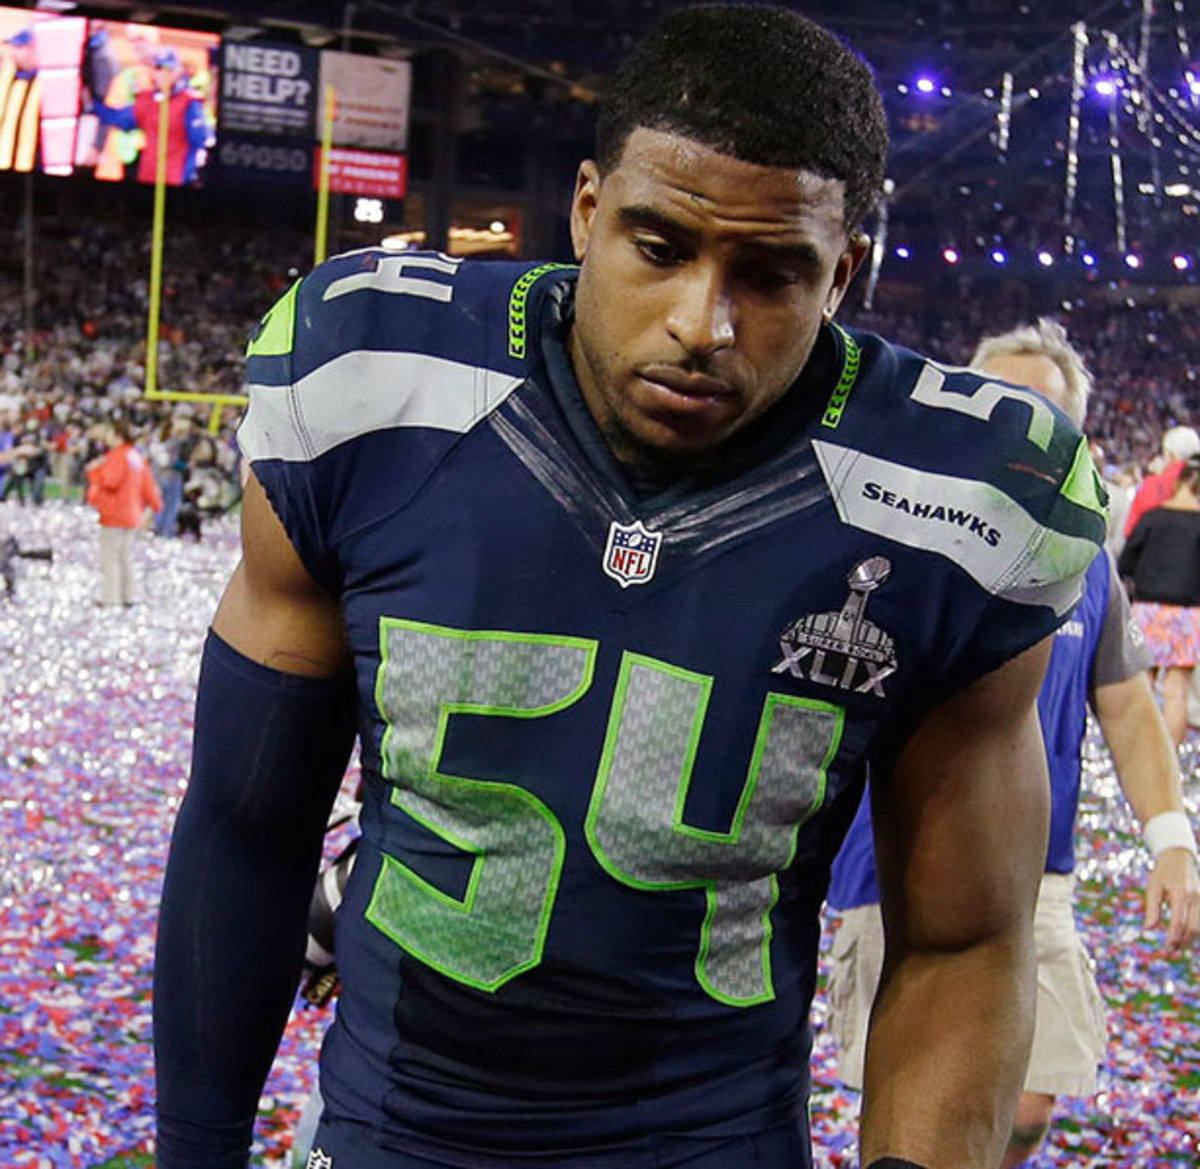 Bobby Wagner Watch Los Angeles Rams Studying Film, Could Sign Seahawks Ex?